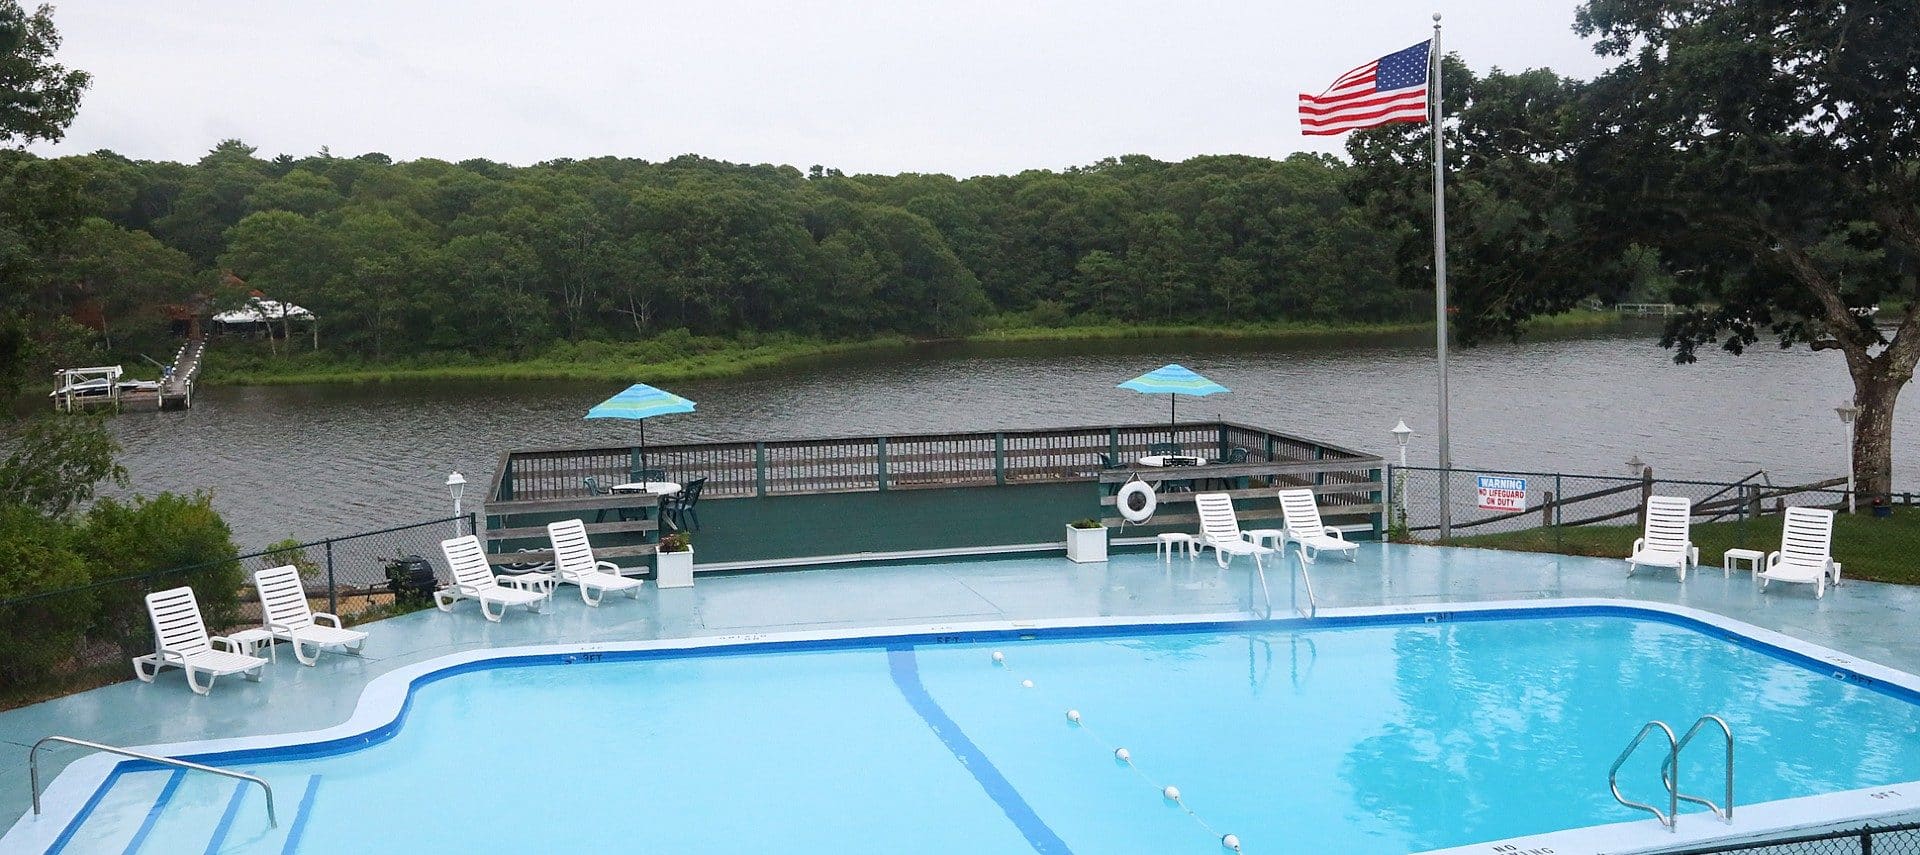 Large pool with white lounging chairs and overlook deck next to a large waterway